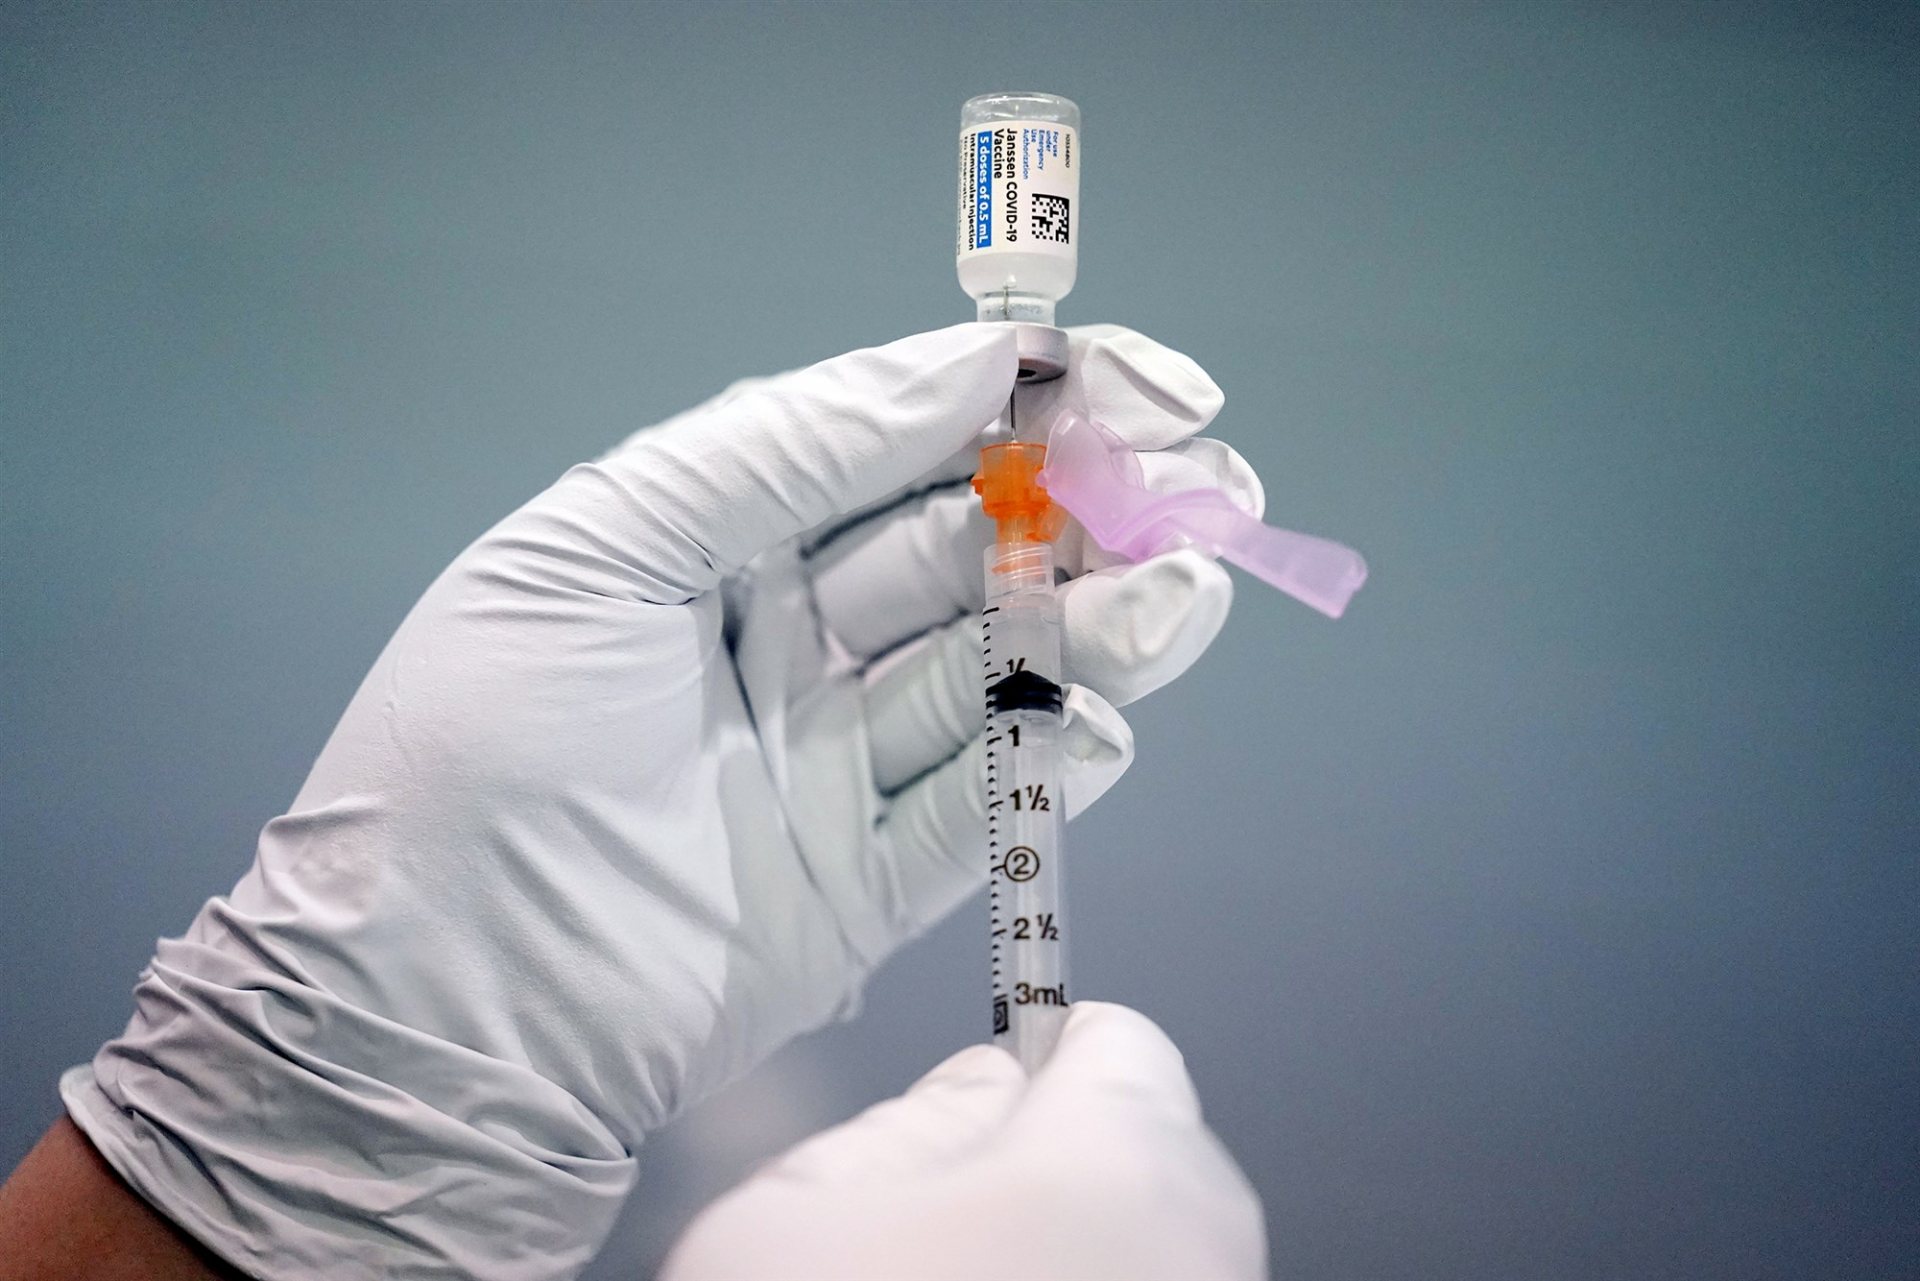 A member of the Philadelphia Fire Department prepares a dose of the Johnson & Johnson Covid-19 vaccine at a vaccination site at a Salvation Army location in Philadelphia, on March 26, 2021.Matt Rourke / AP file